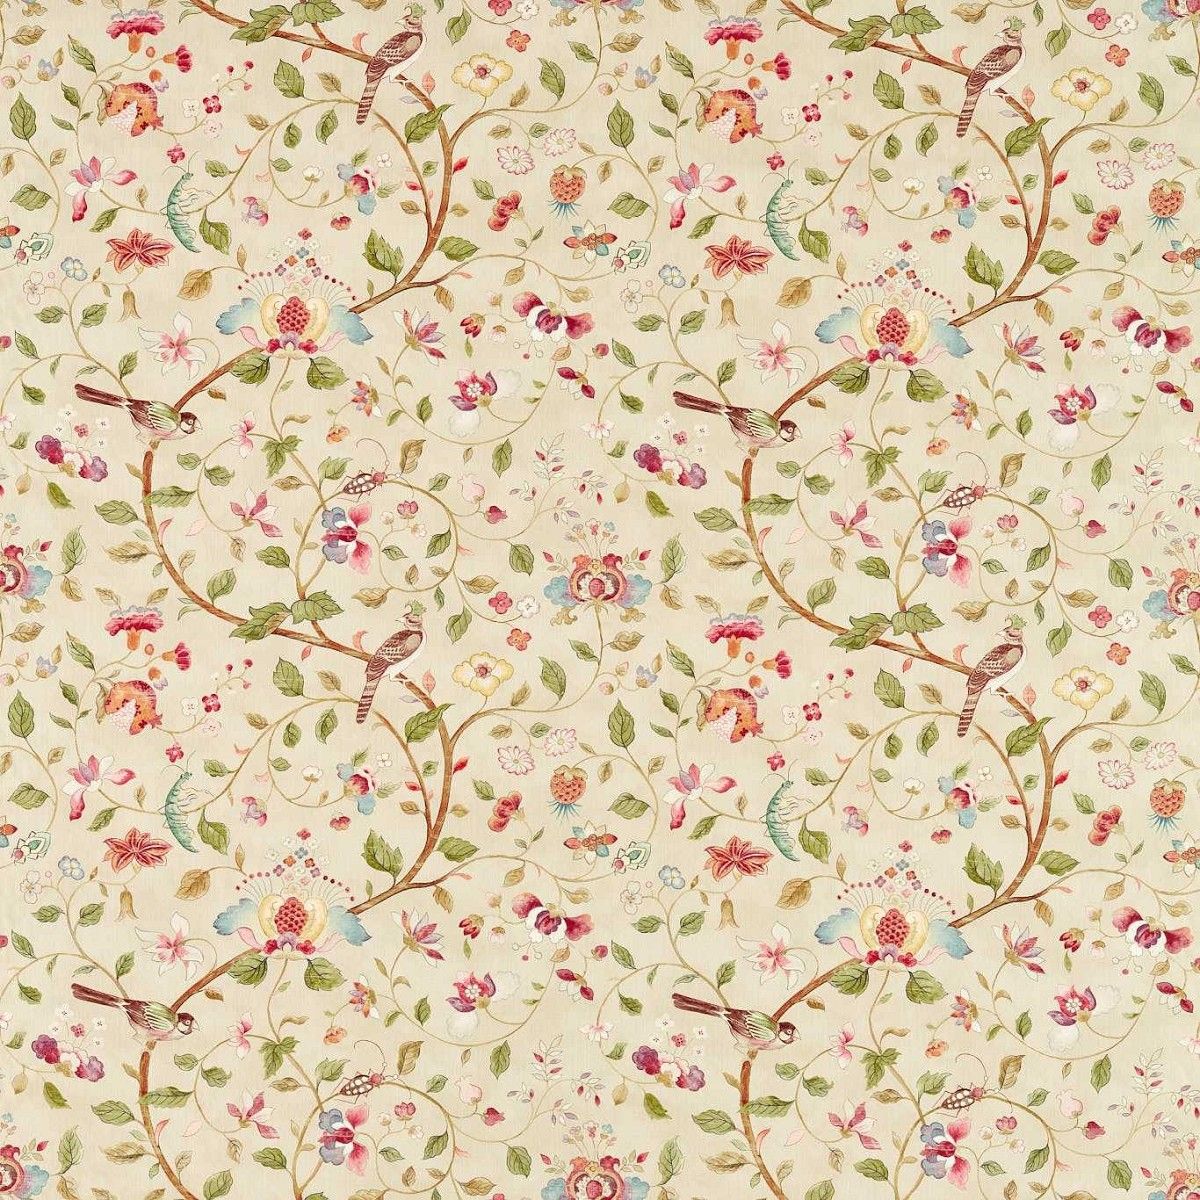 Arils Garden Olive/Mulberry Fabric by Sanderson